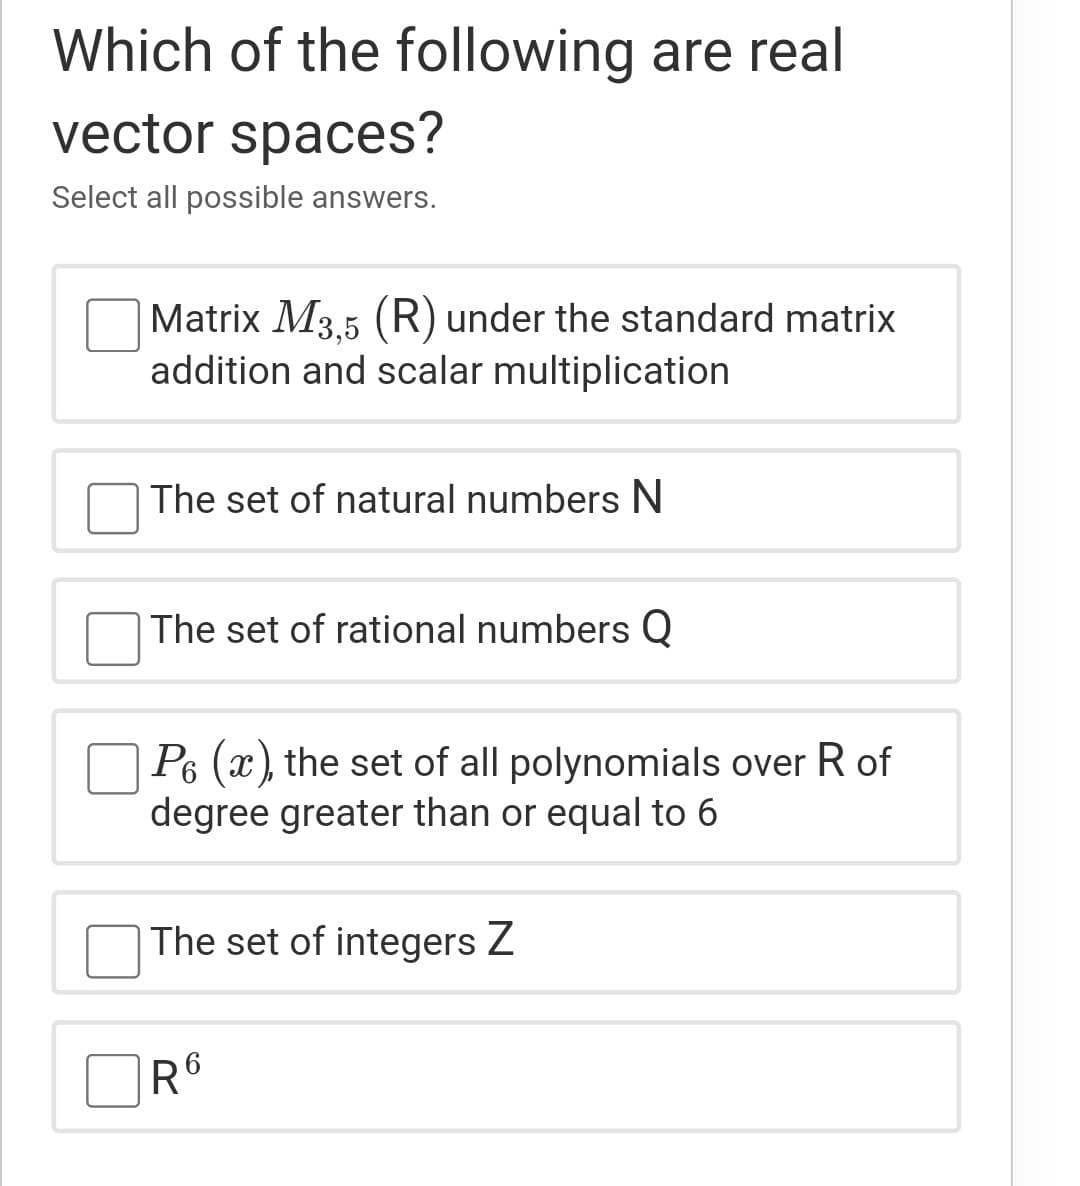 Which of the following are real
vector spaces?
Select all possible answers.
Matrix M3.5 (R) under the standard matrix
addition and scalar multiplication
The set of natural numbers N
The set of rational numbers Q
O P6 (x), the set of all polynomials over R of
degree greater than or equal to 6
The set of integers Z
R6
